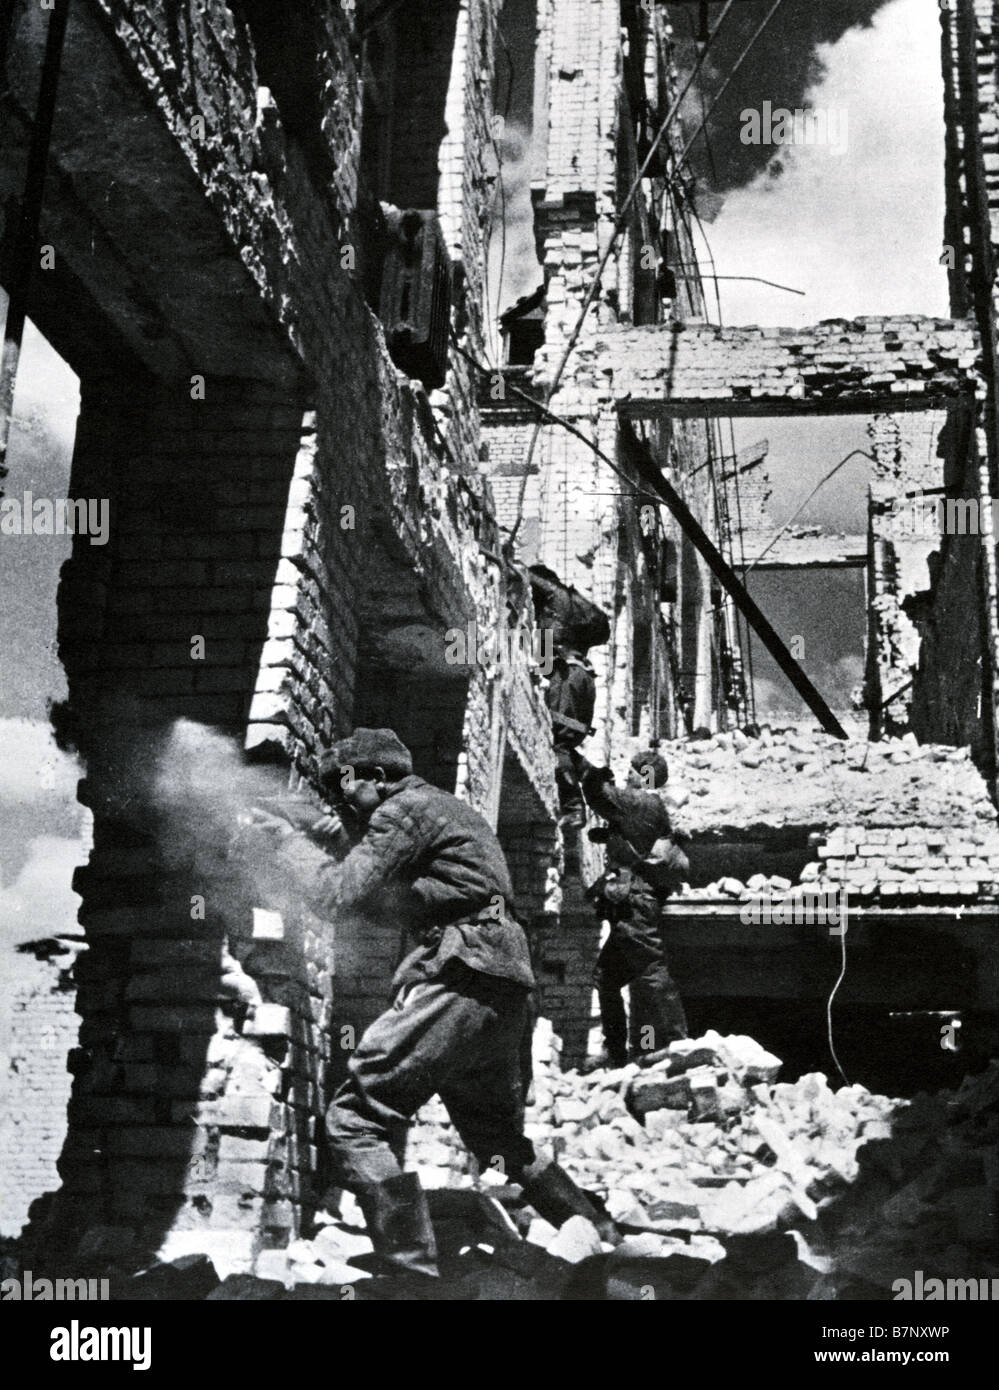 STALINGRAD Soviet soldiers face the German onslaught in January 1943 Stock Photo